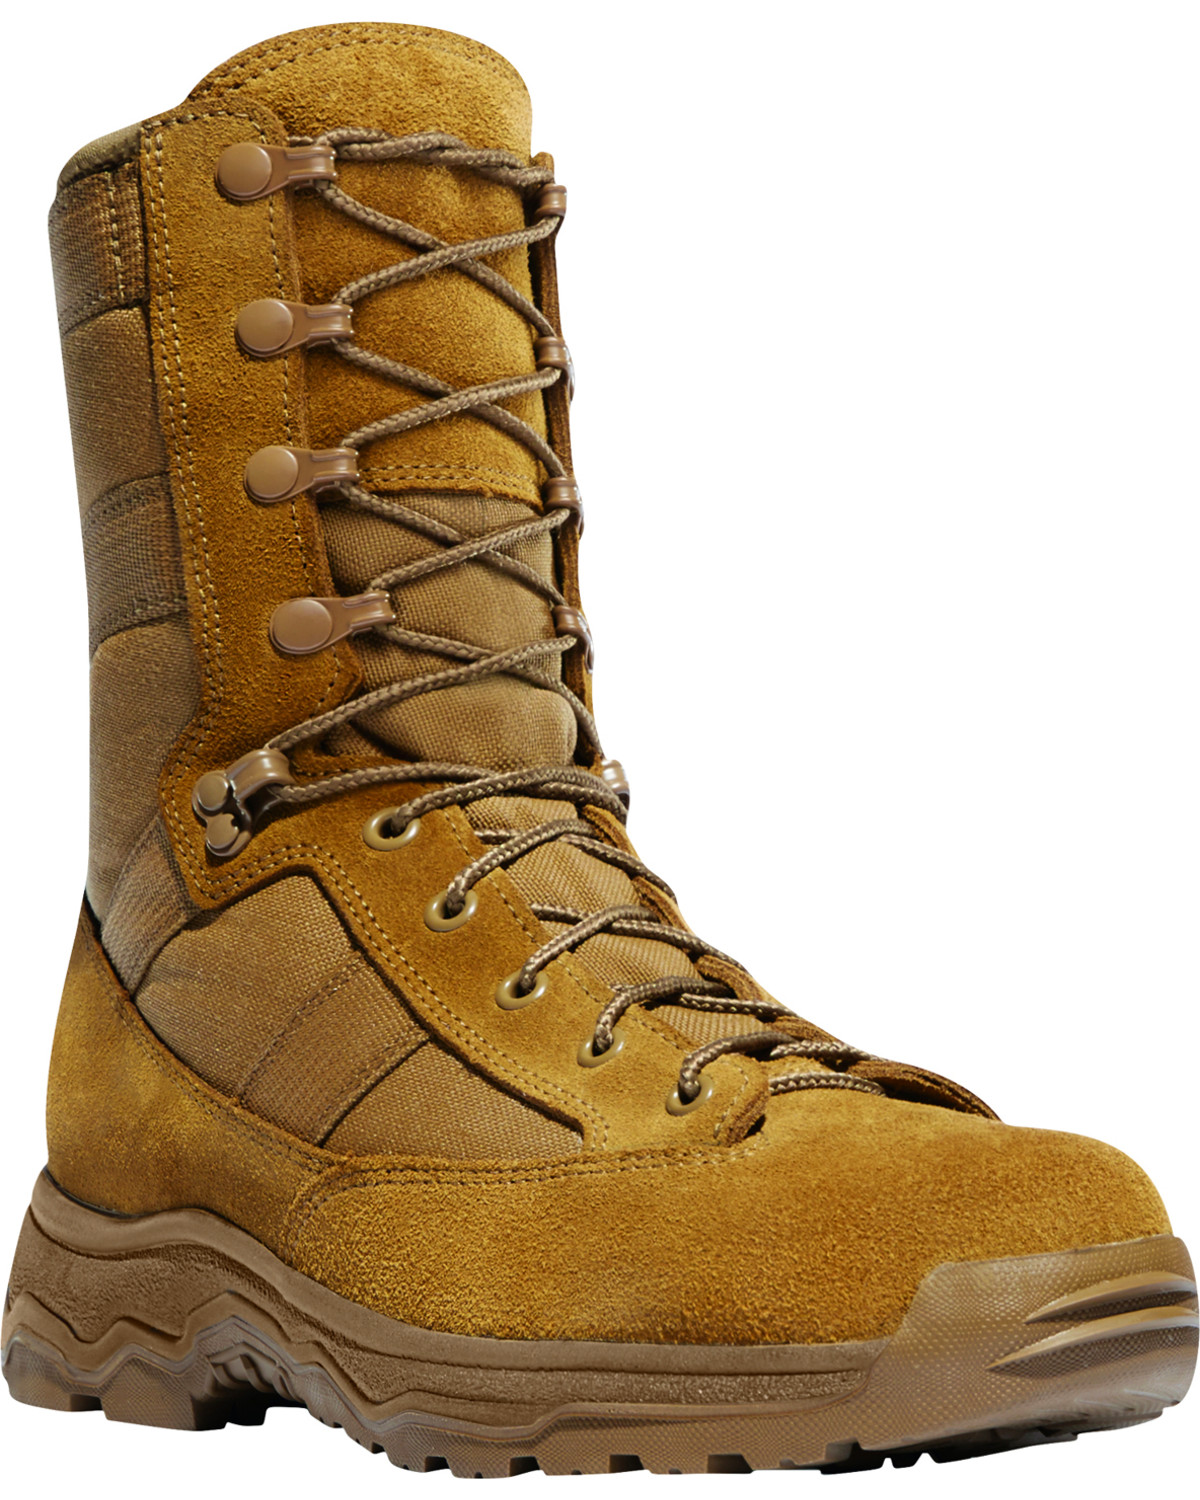 Danner Men's Coyote Hot 8" Reckoning Tactical Boots - Round Toe